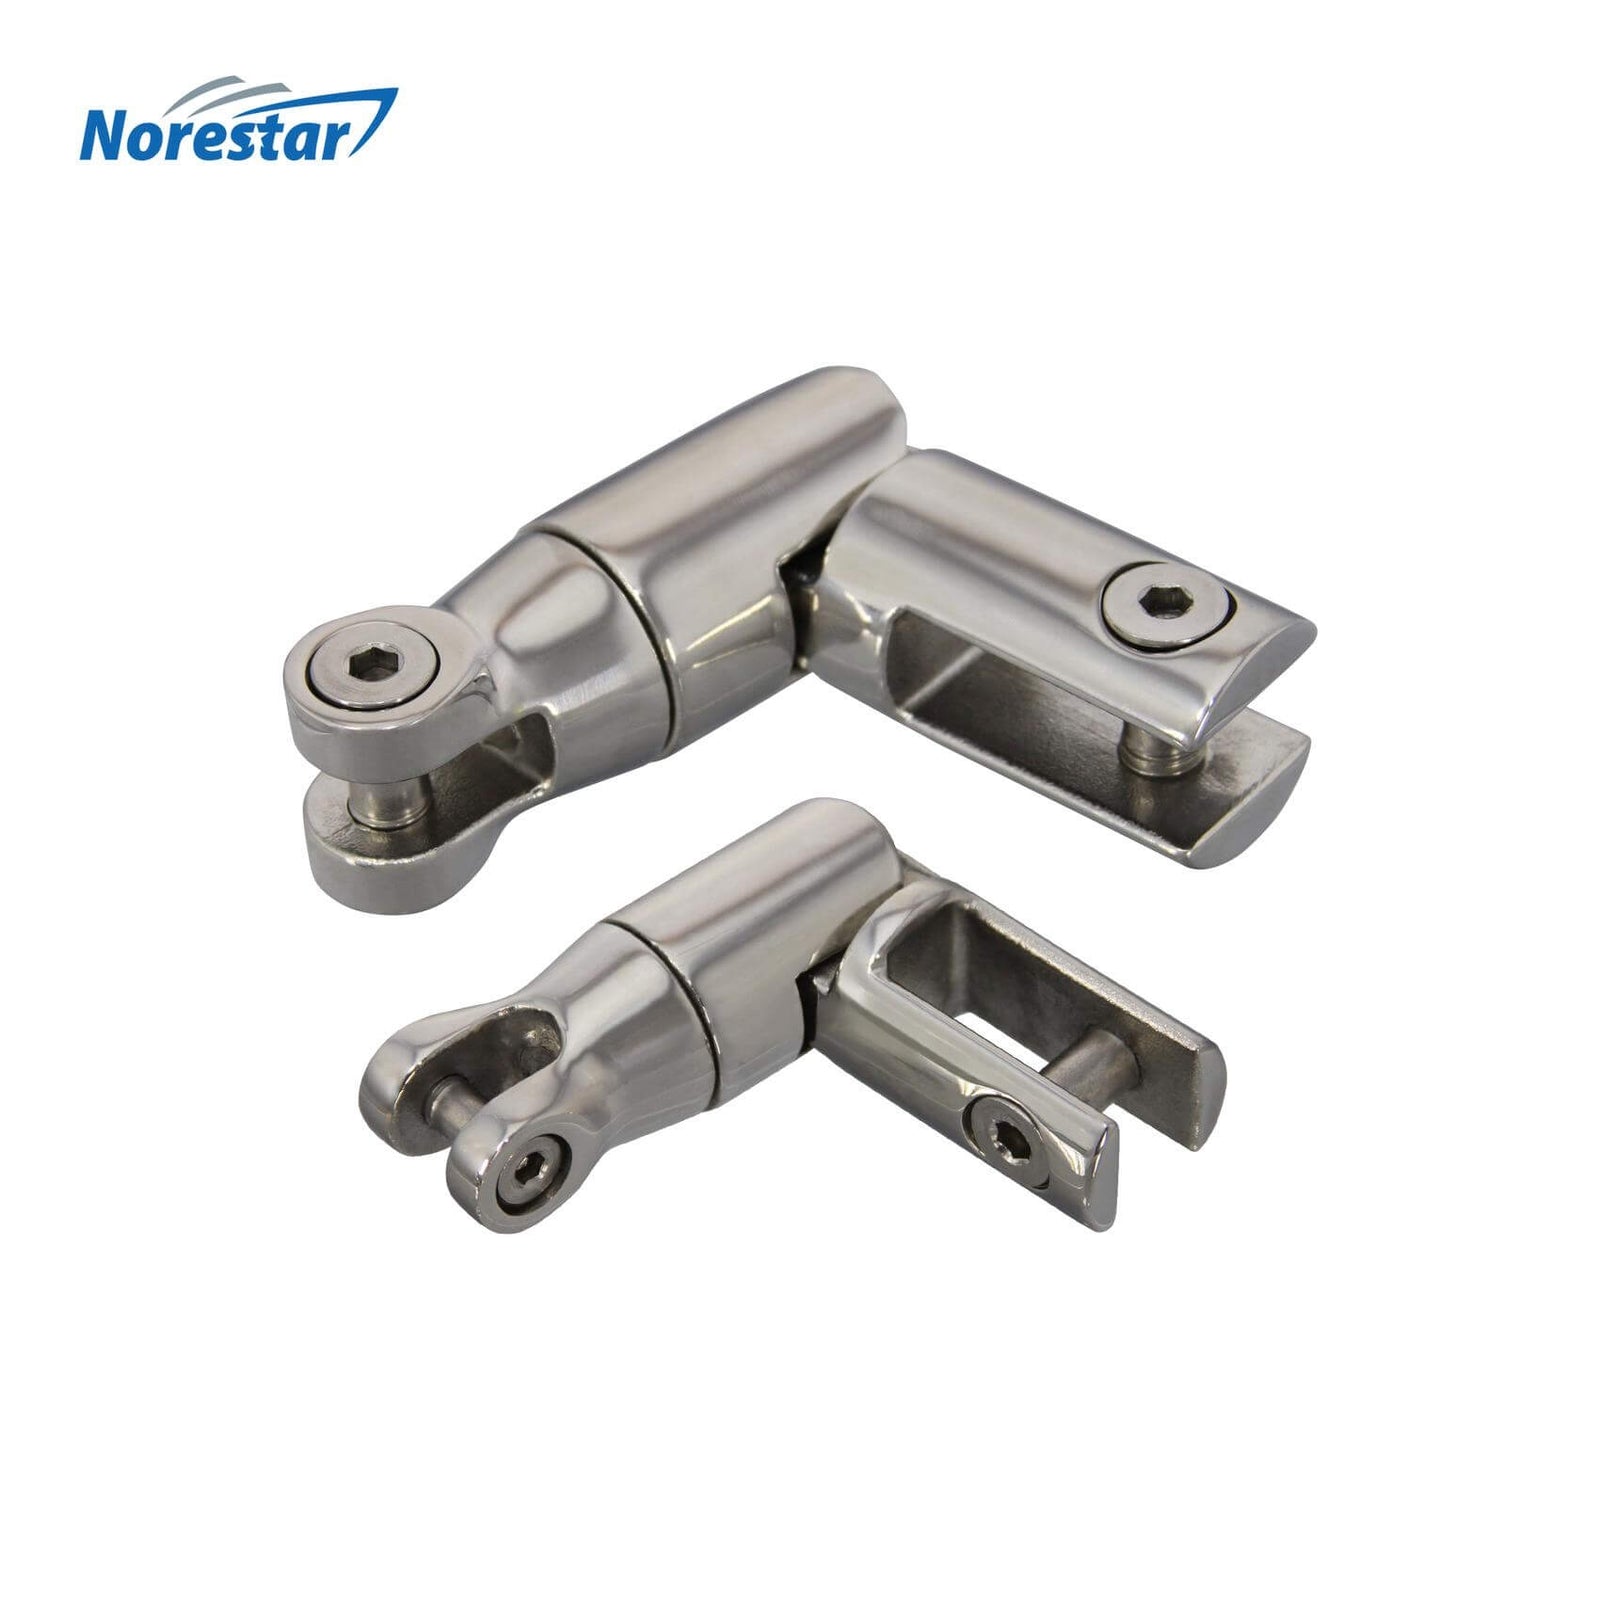 Norestar Stainless Steel Multidirectional Anchor Swivel Size Comparison